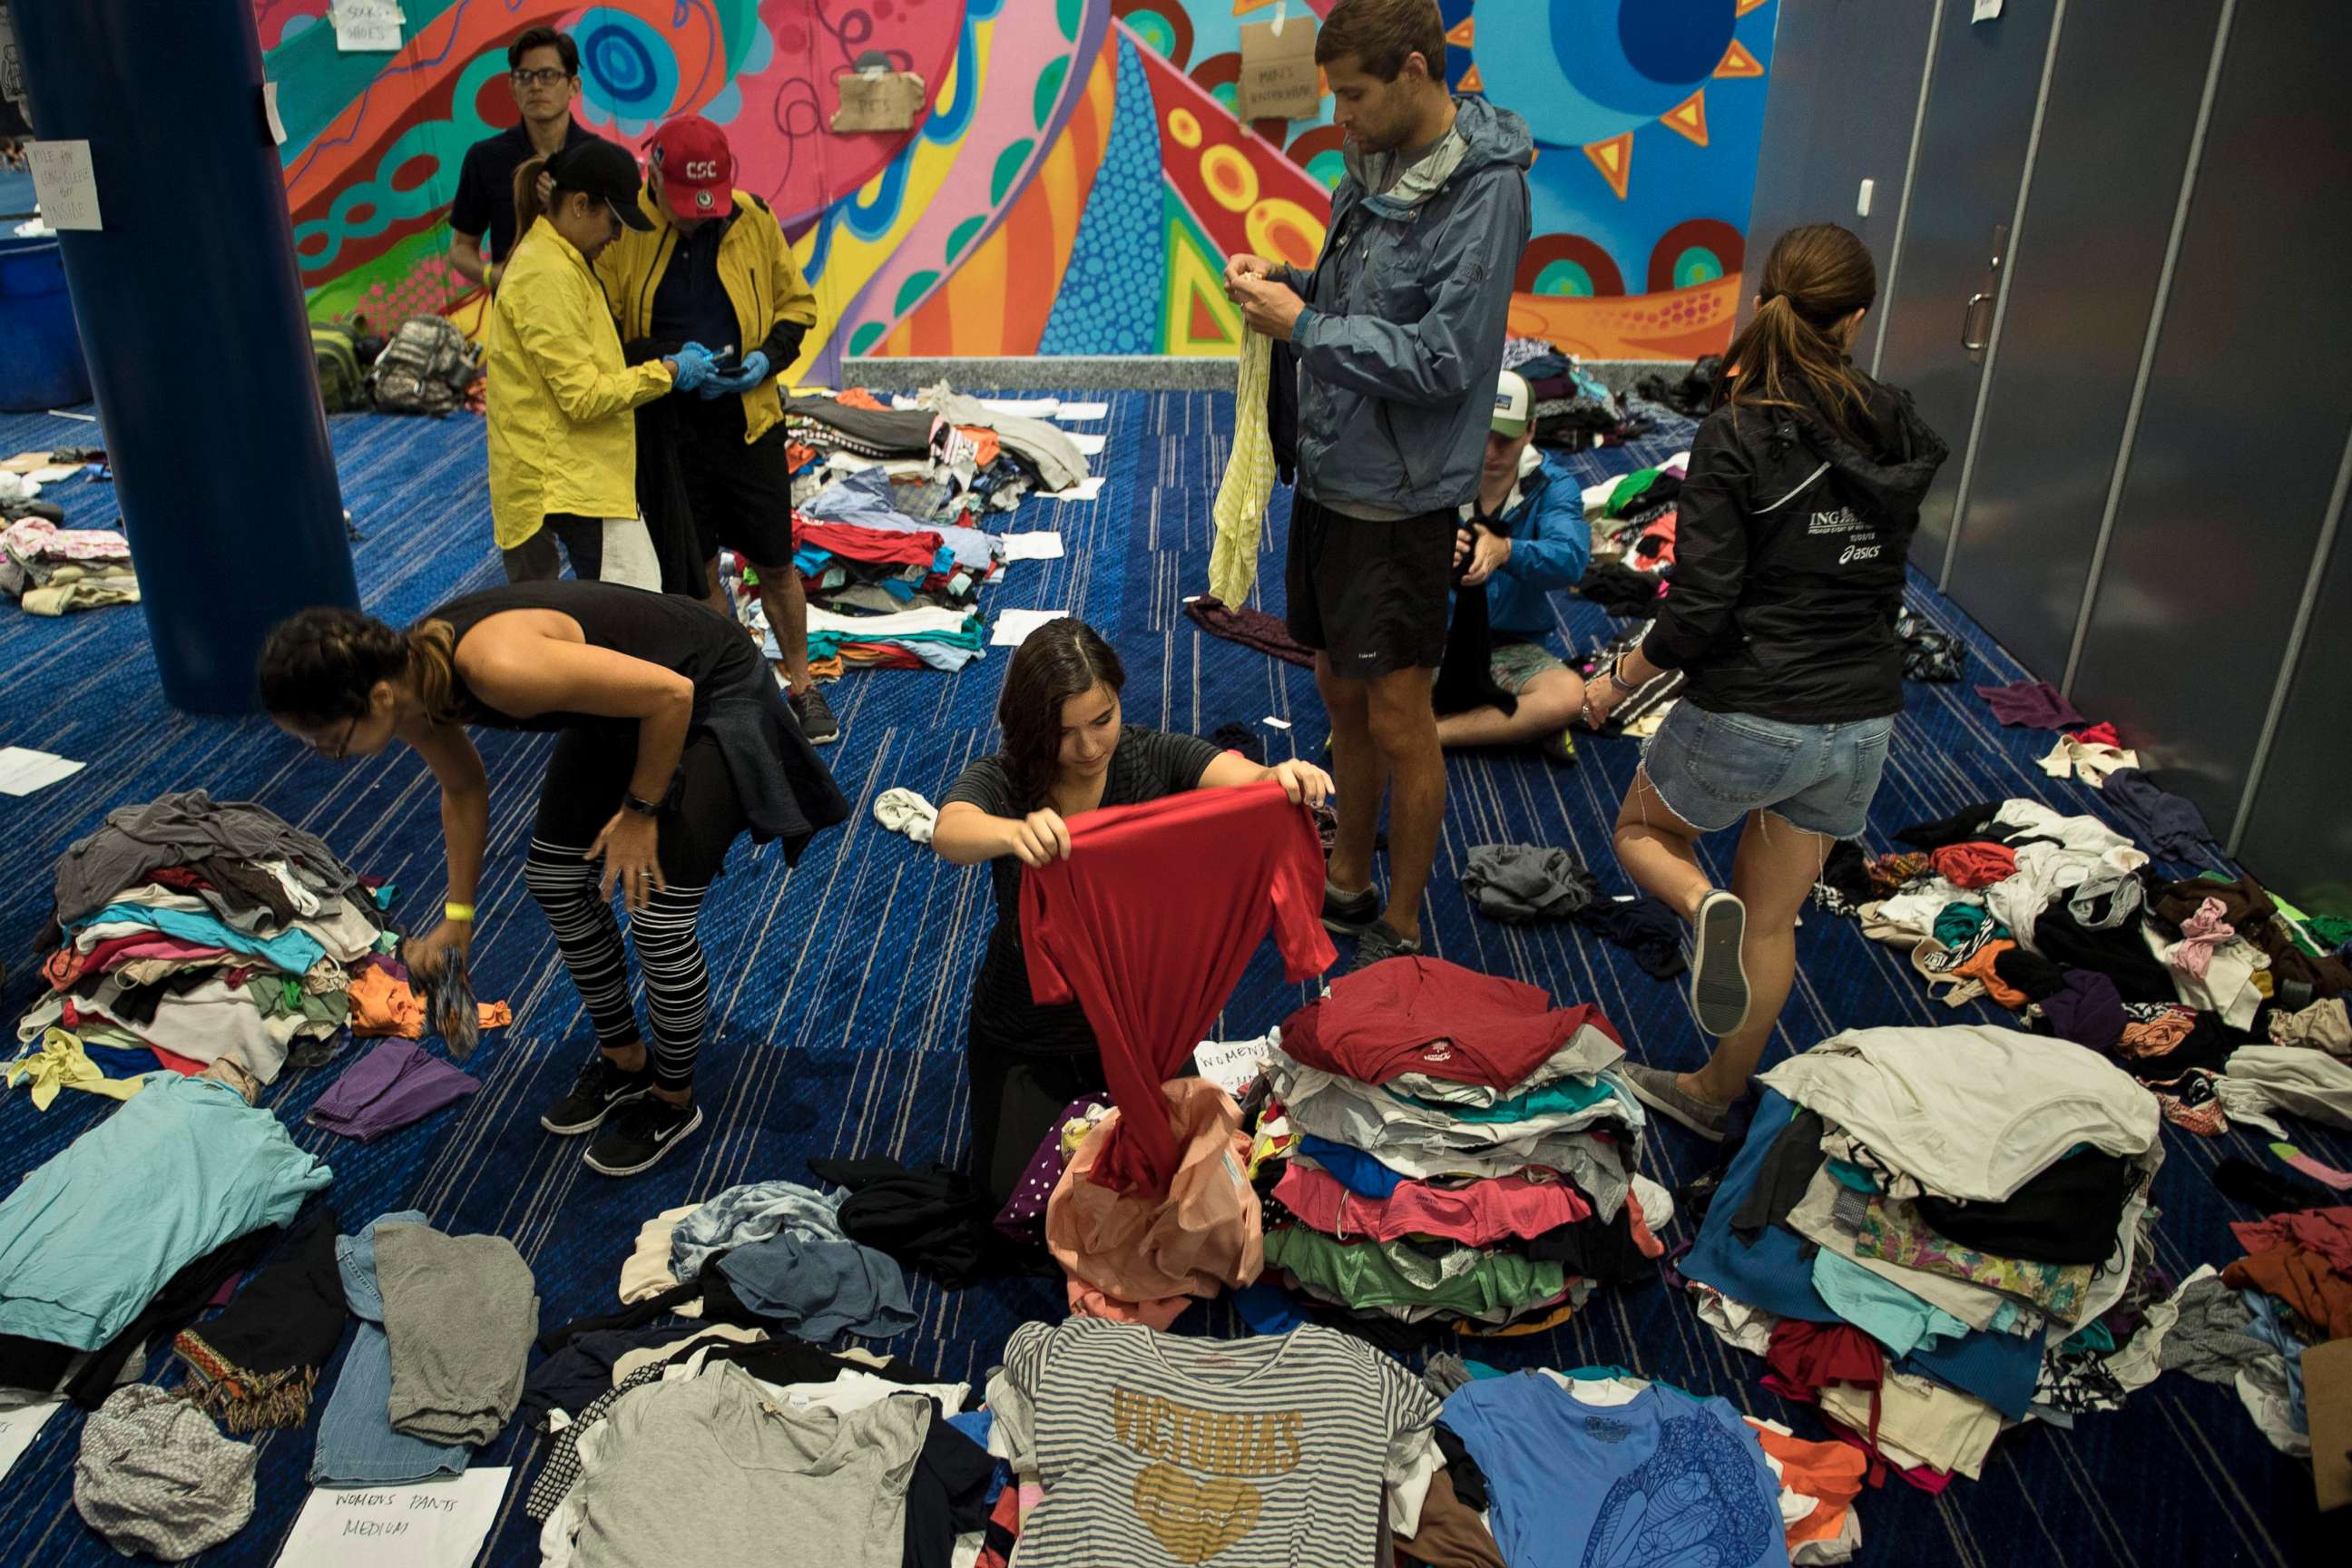 PHOTO: Volunteers sort through donated clothing at a shelter in the George R. Brown Convention Center during the aftermath of Hurricane Harvey, Aug. 28, 2017, in Houston.